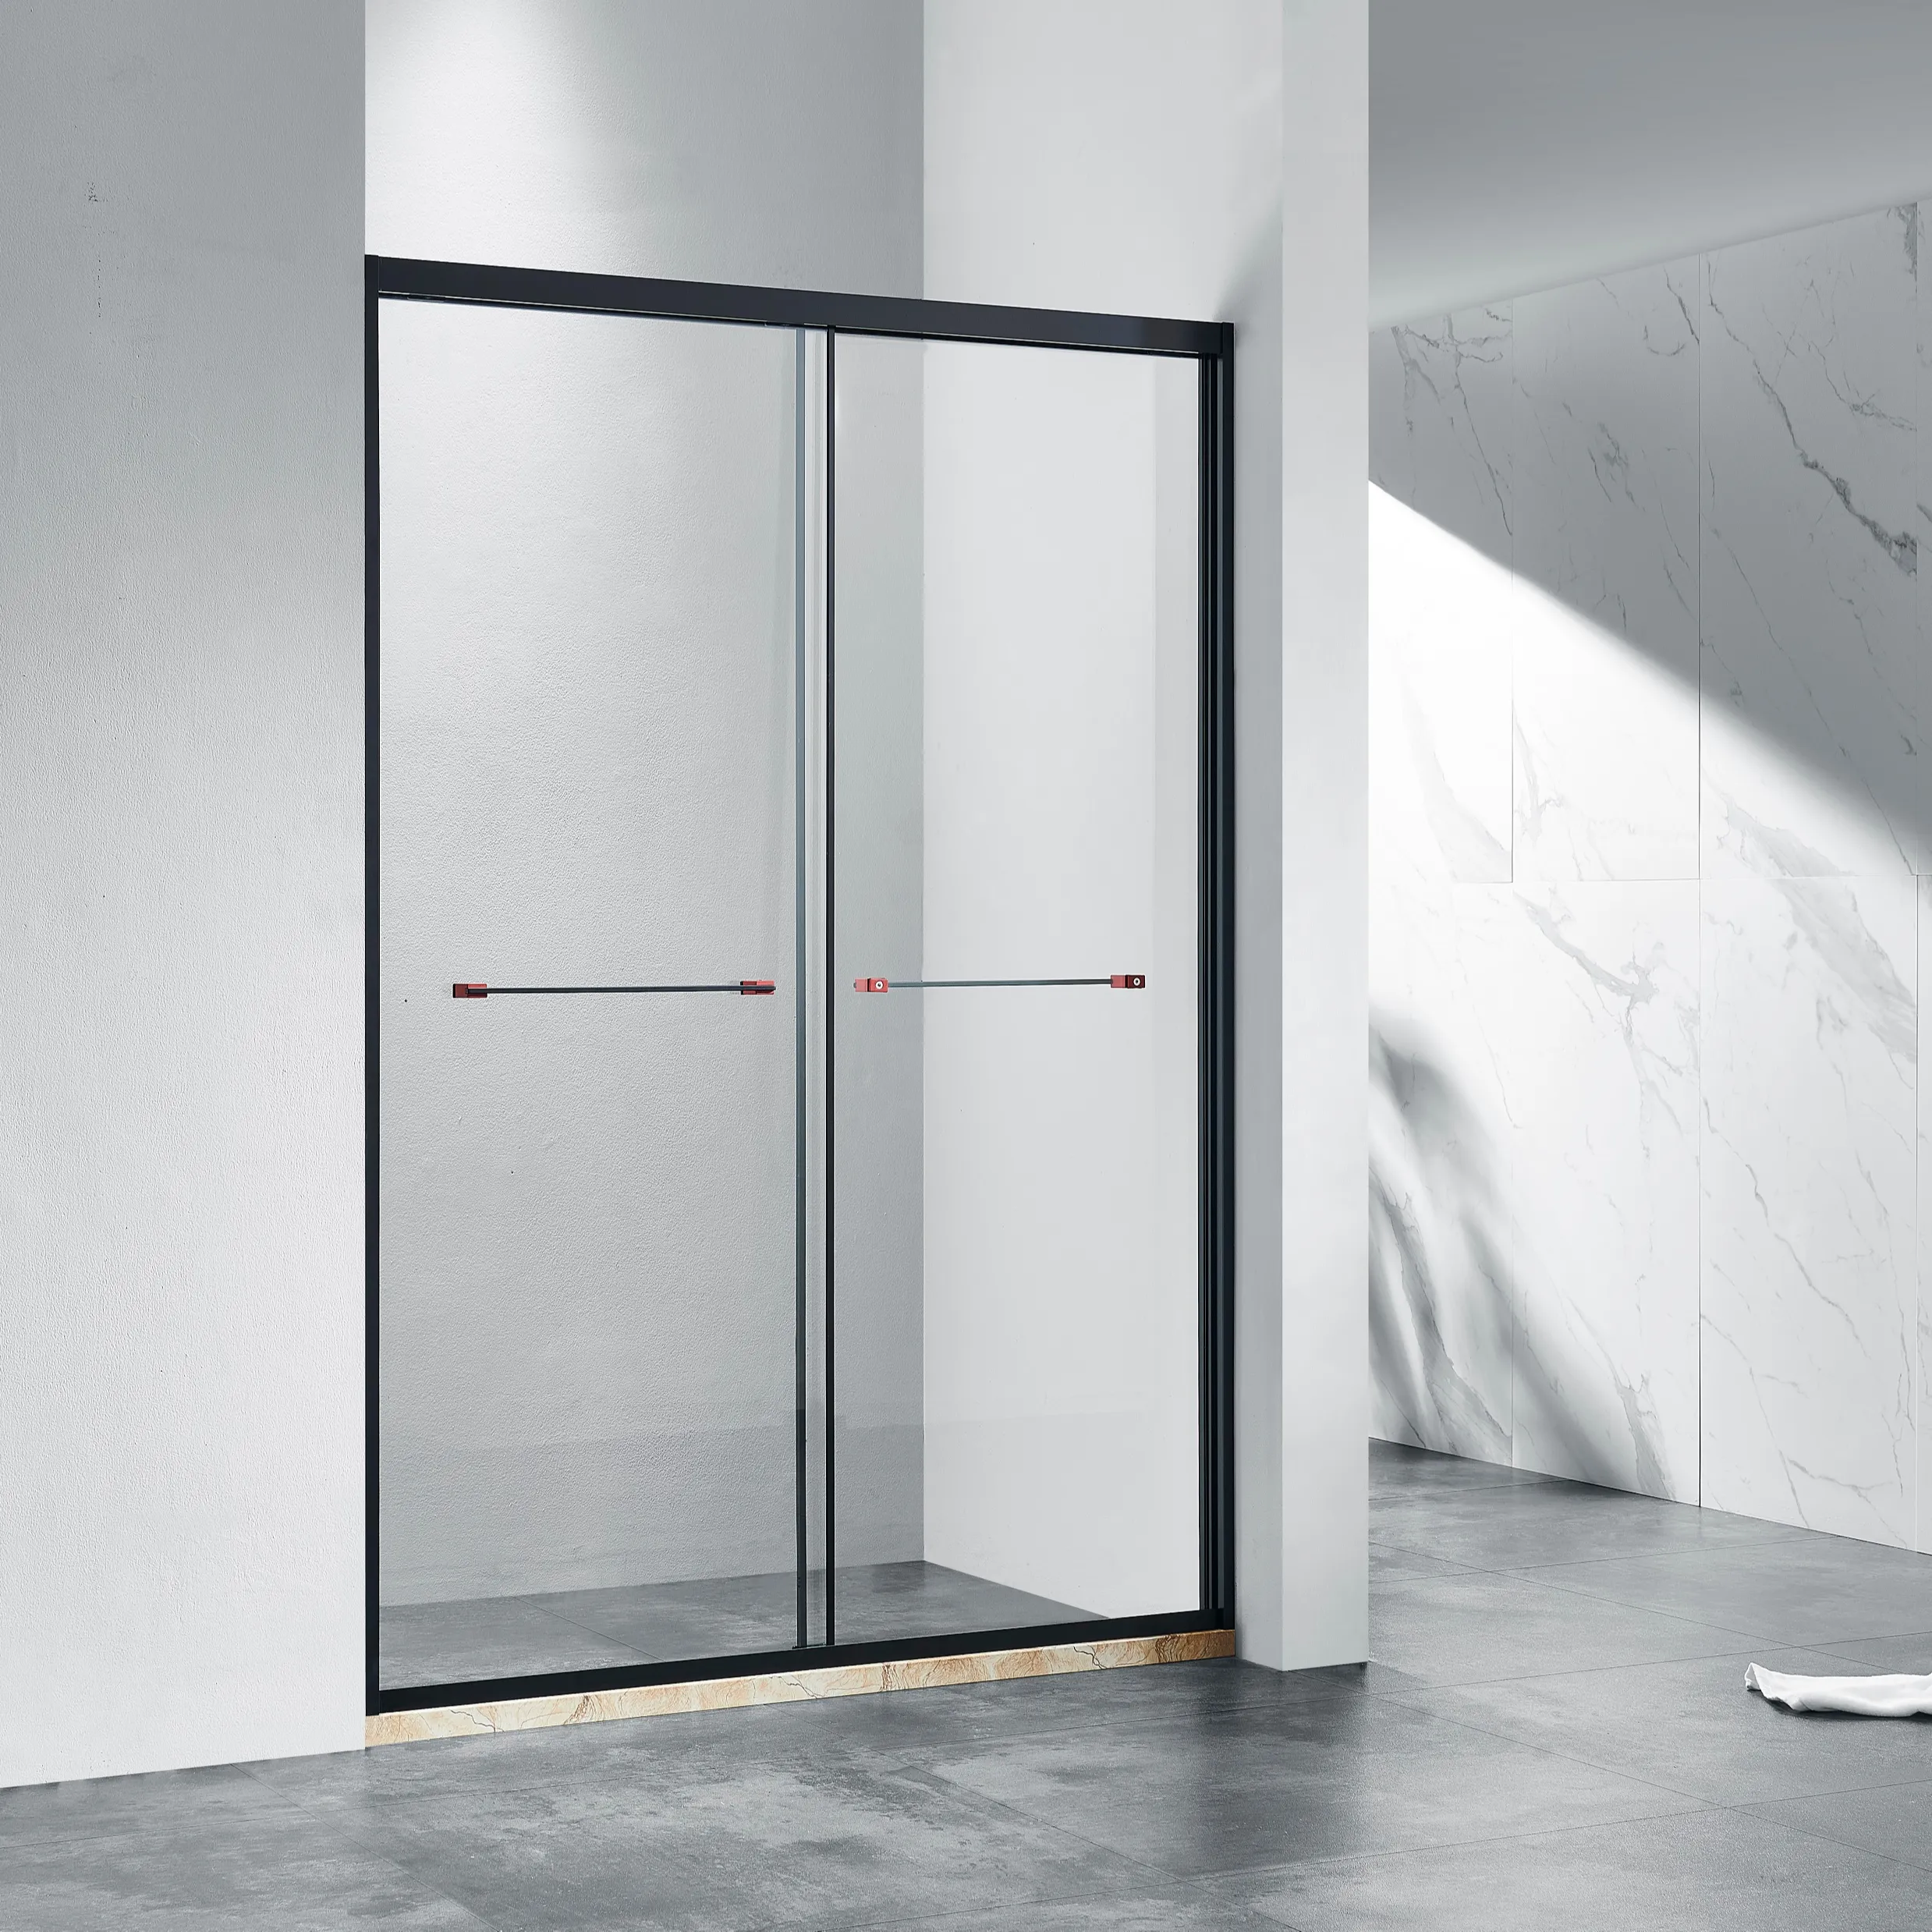 High Quality and quiet close stainless steel glass shower screen sliding glass shower door hardware